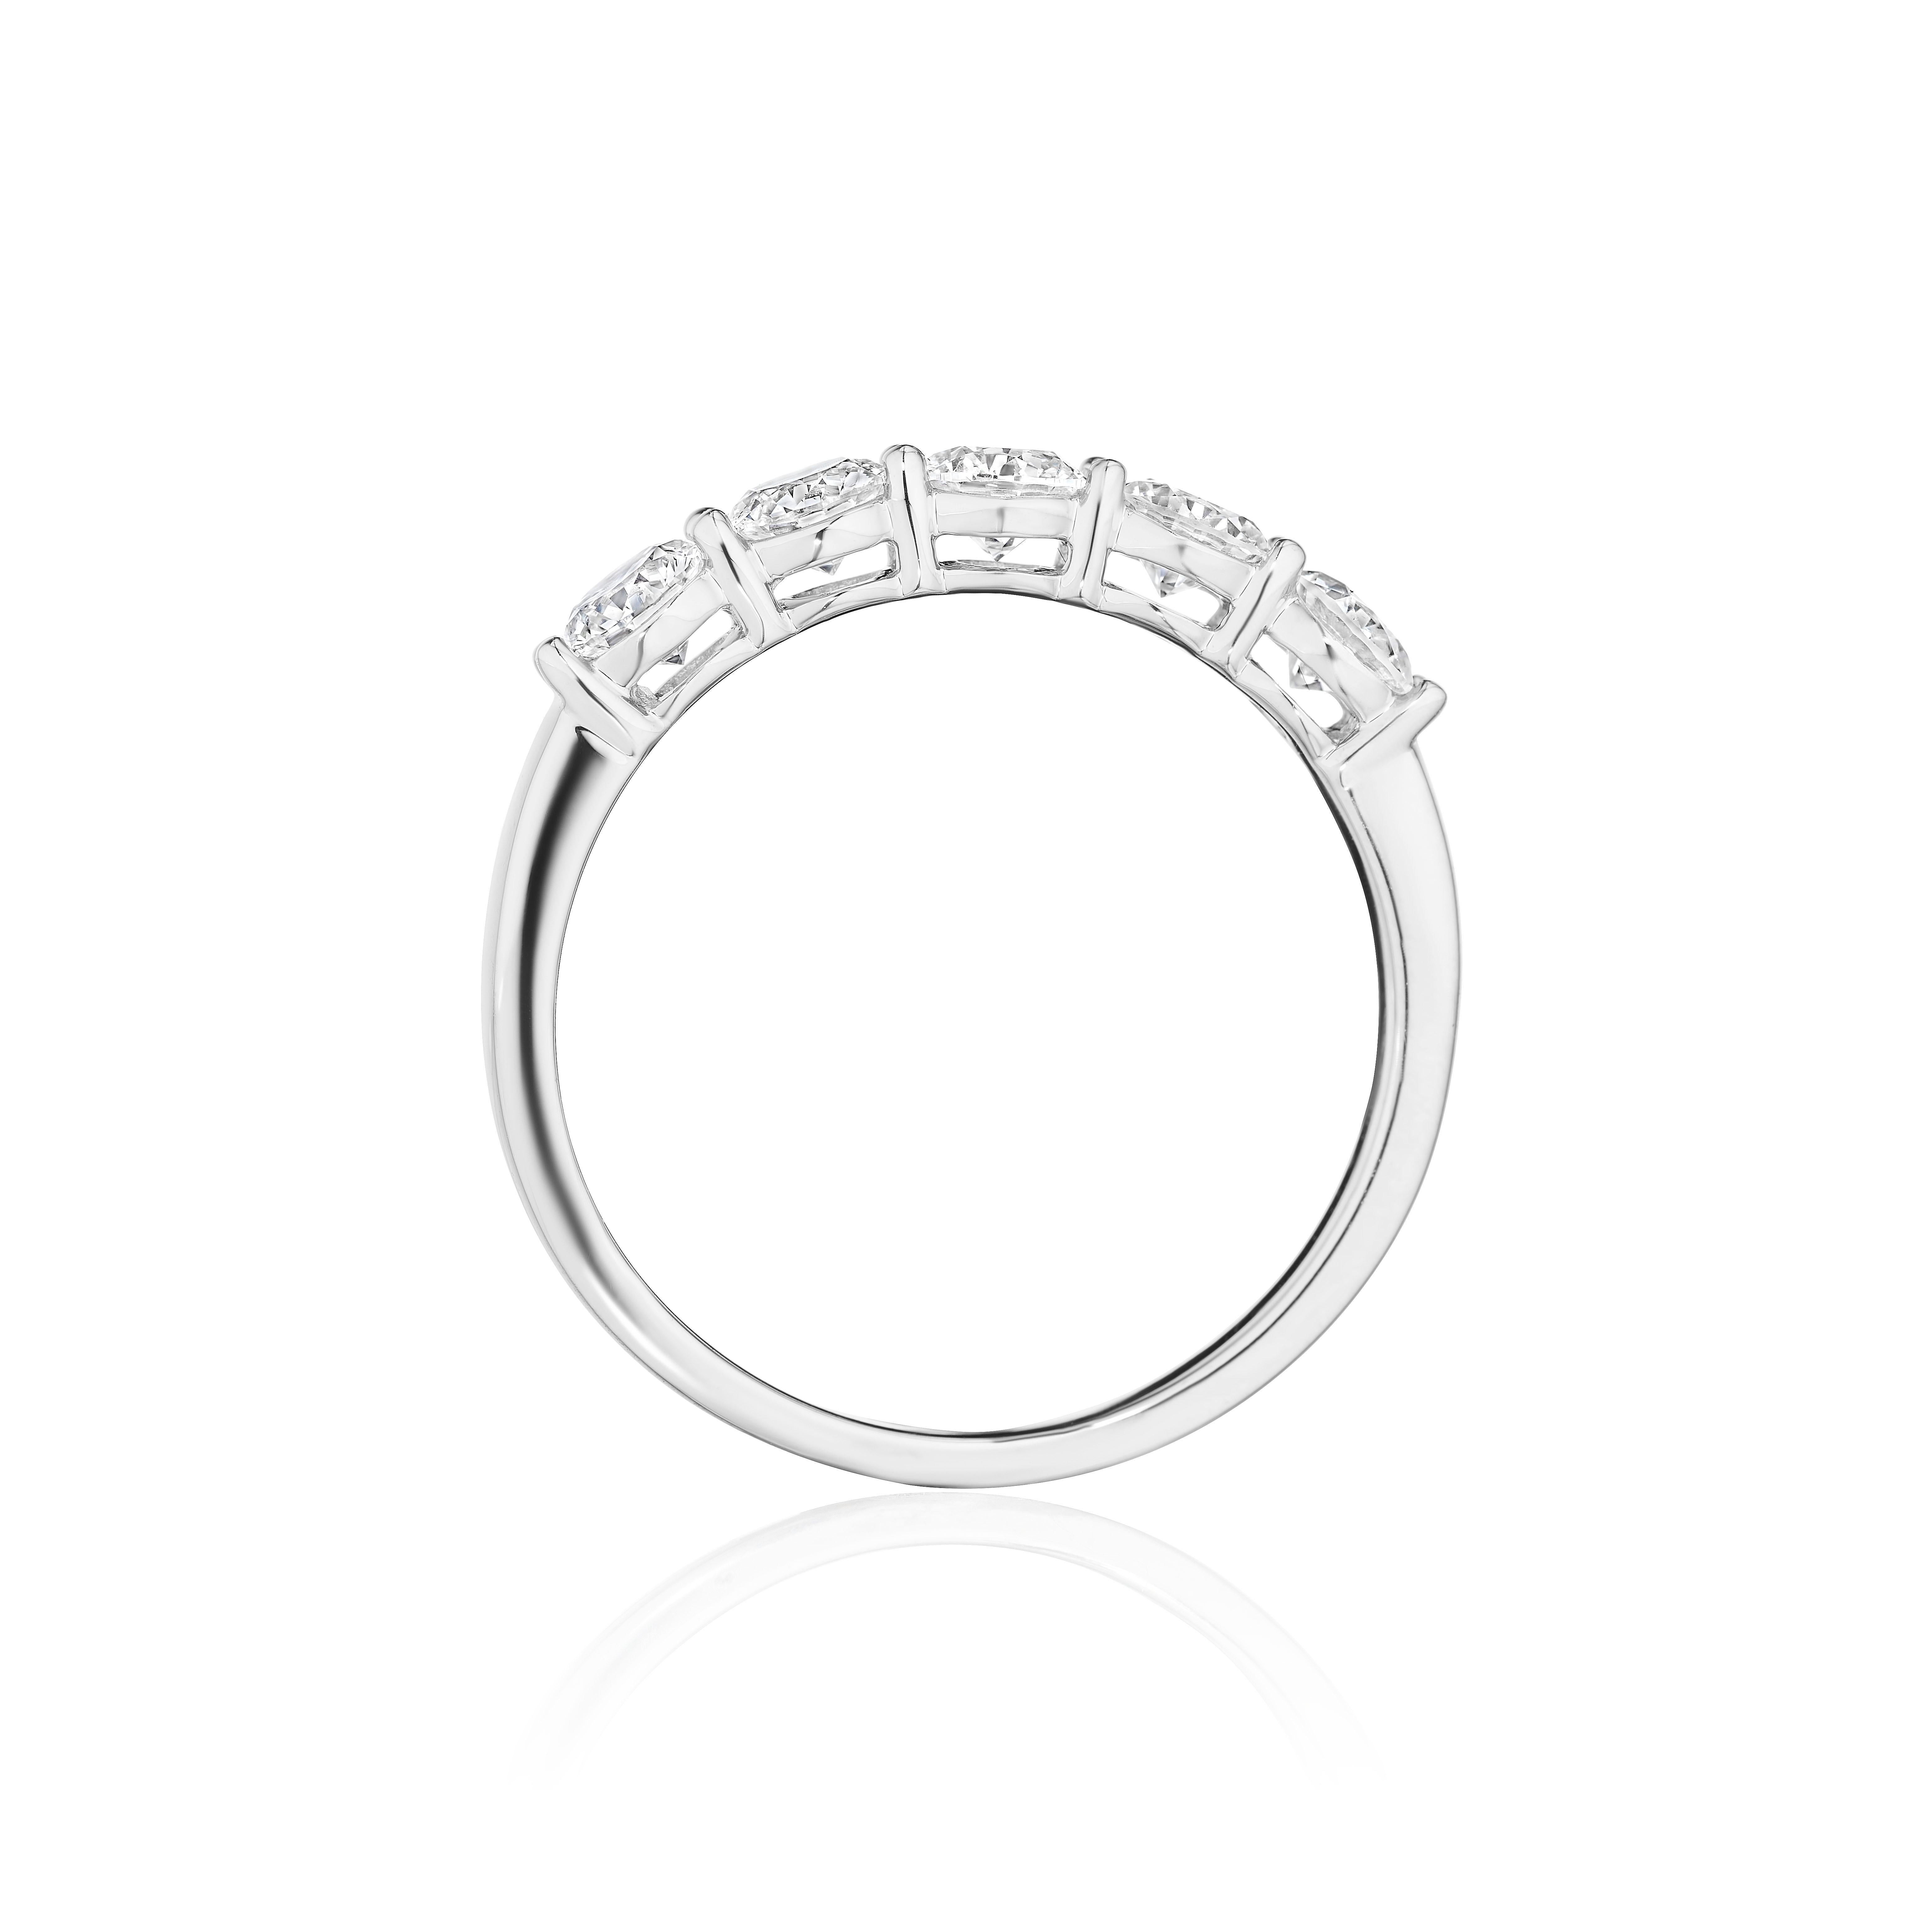 •	Crafted in 18KT gold, this band is made with 5 round brilliant cut diamonds, and has a combining total weight of approximately 1.00 carat. The diamonds are set into a shared prong setting.  Worn beautifully on its own or stacked.  A beautiful and